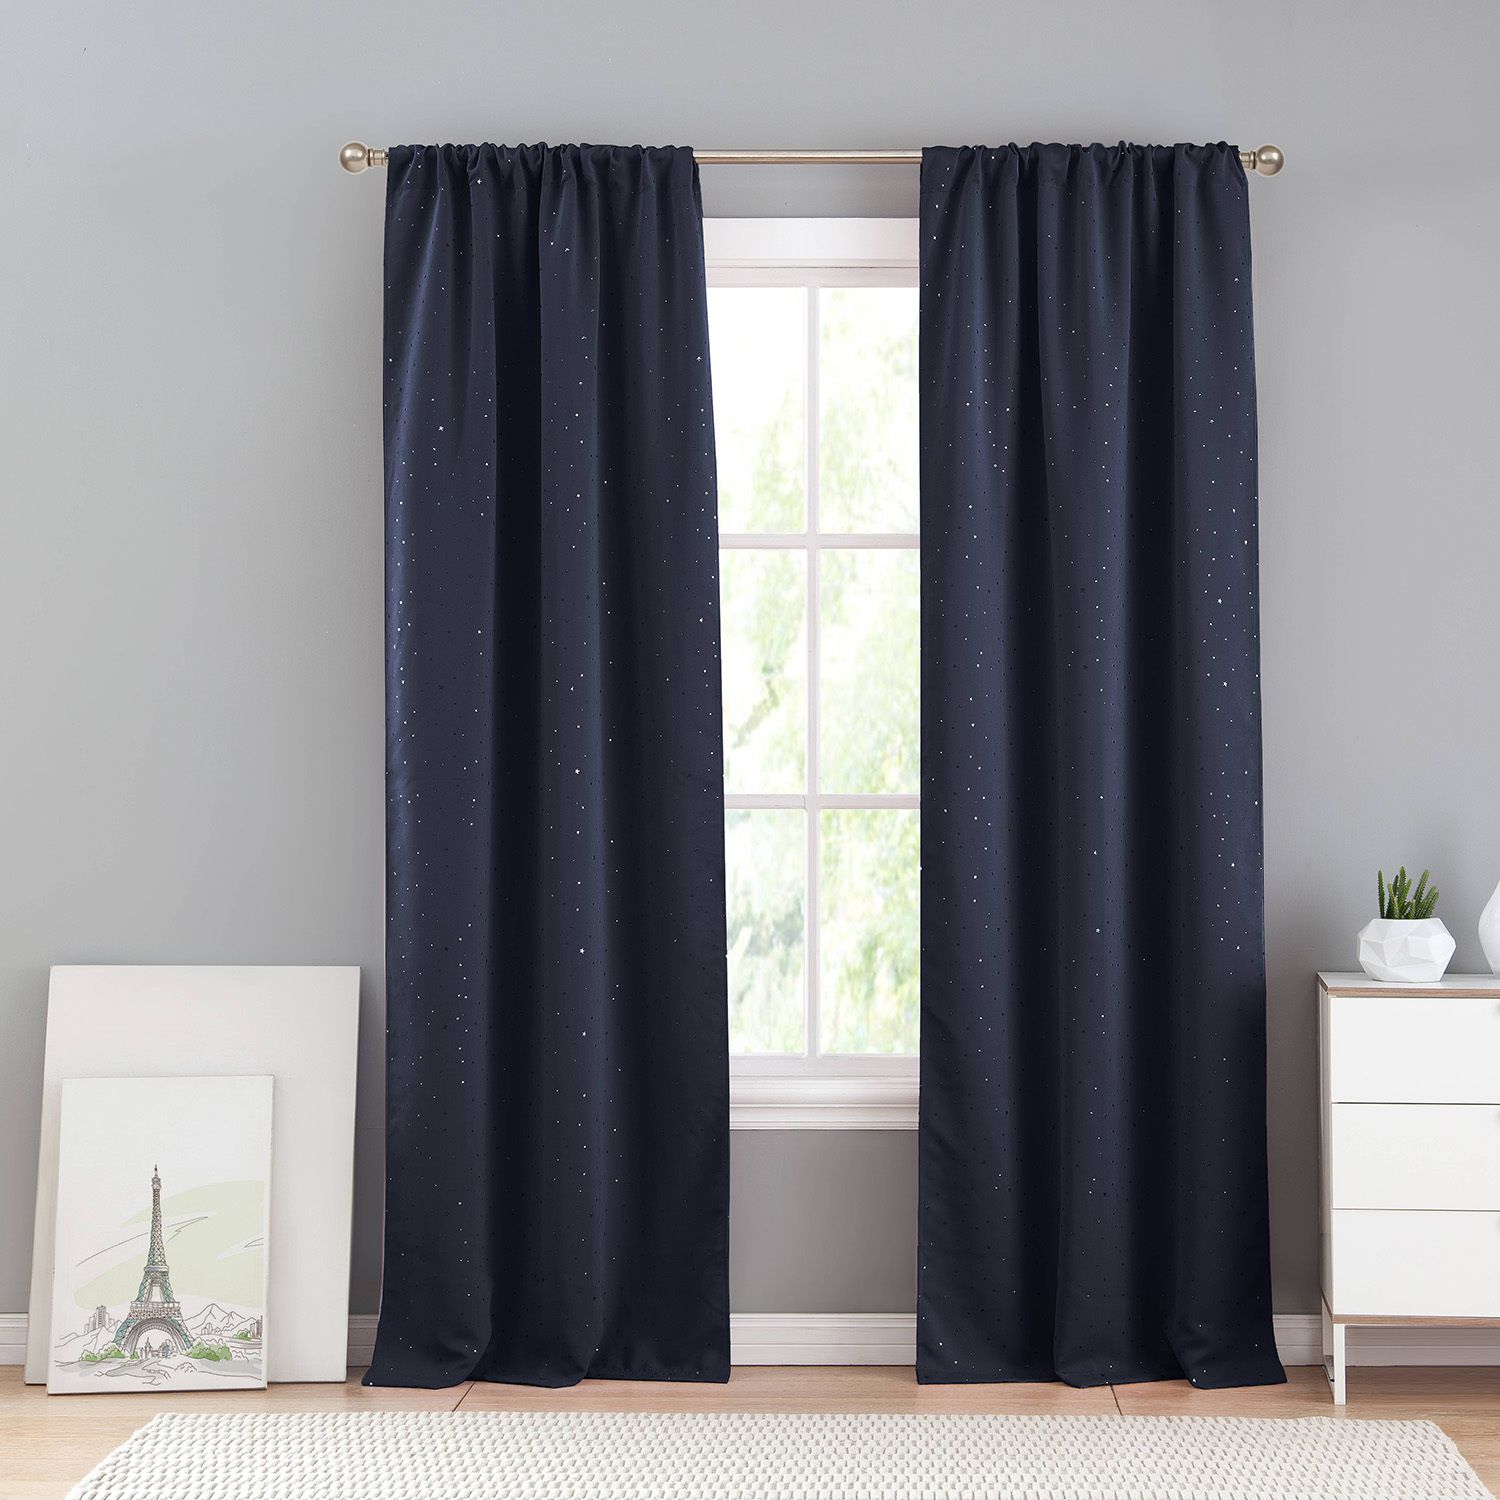 Image for Duck River Textile Davis 2-pack Window Curtain Set at Kohl's.